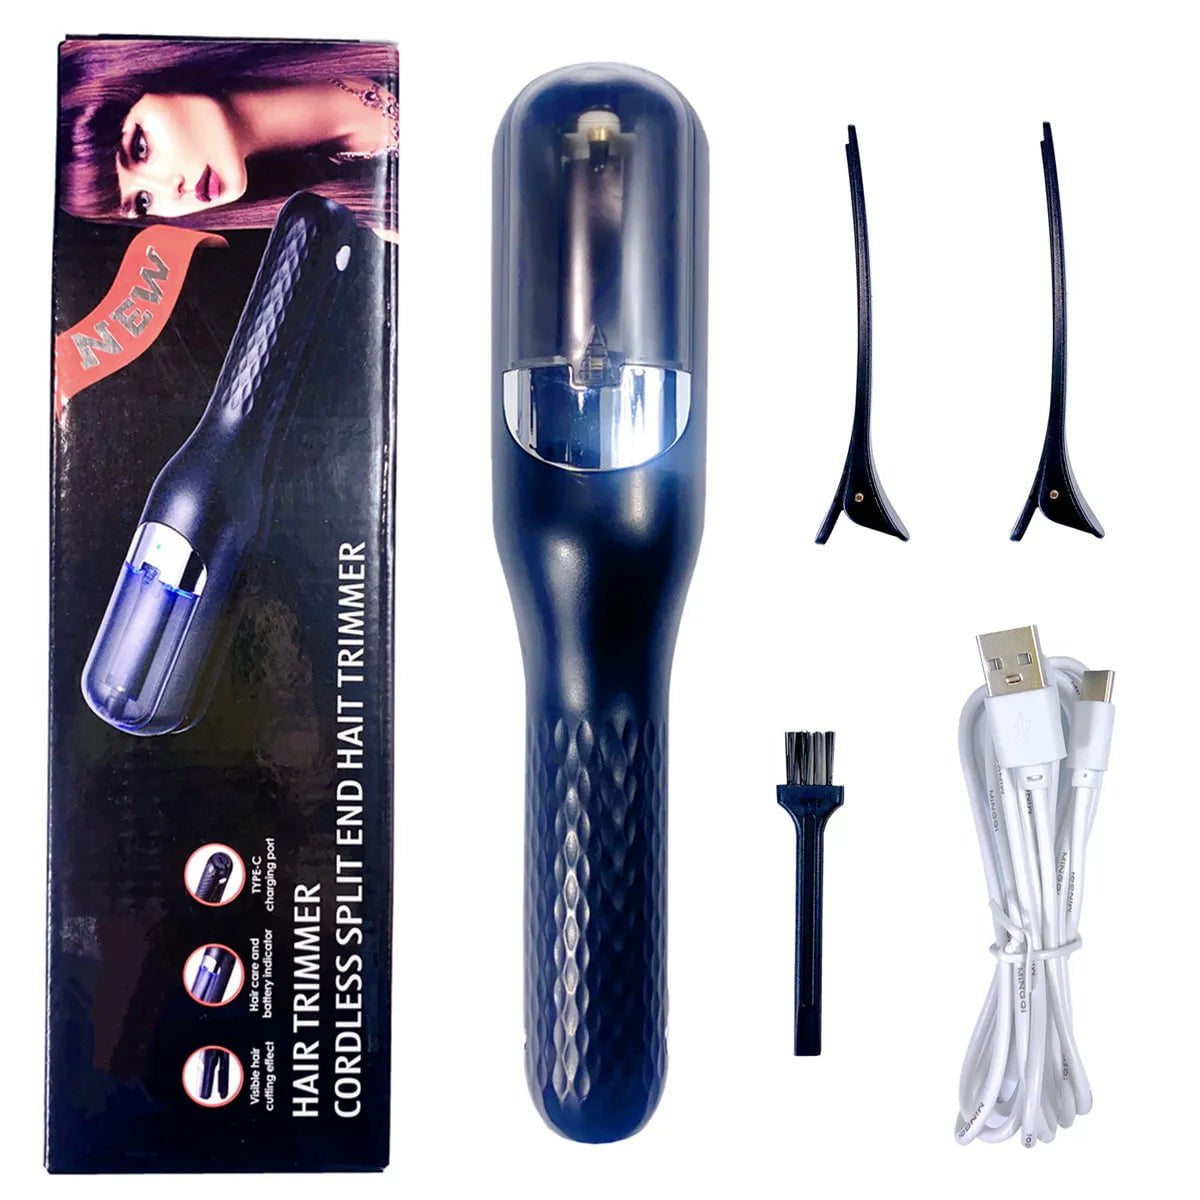 Split Hair Trimmer Hair Split Ends Trimmer Remover Damaged Hair Repair Hair Care Treatment Rechargeable Cordless Hair Cutting black / United States